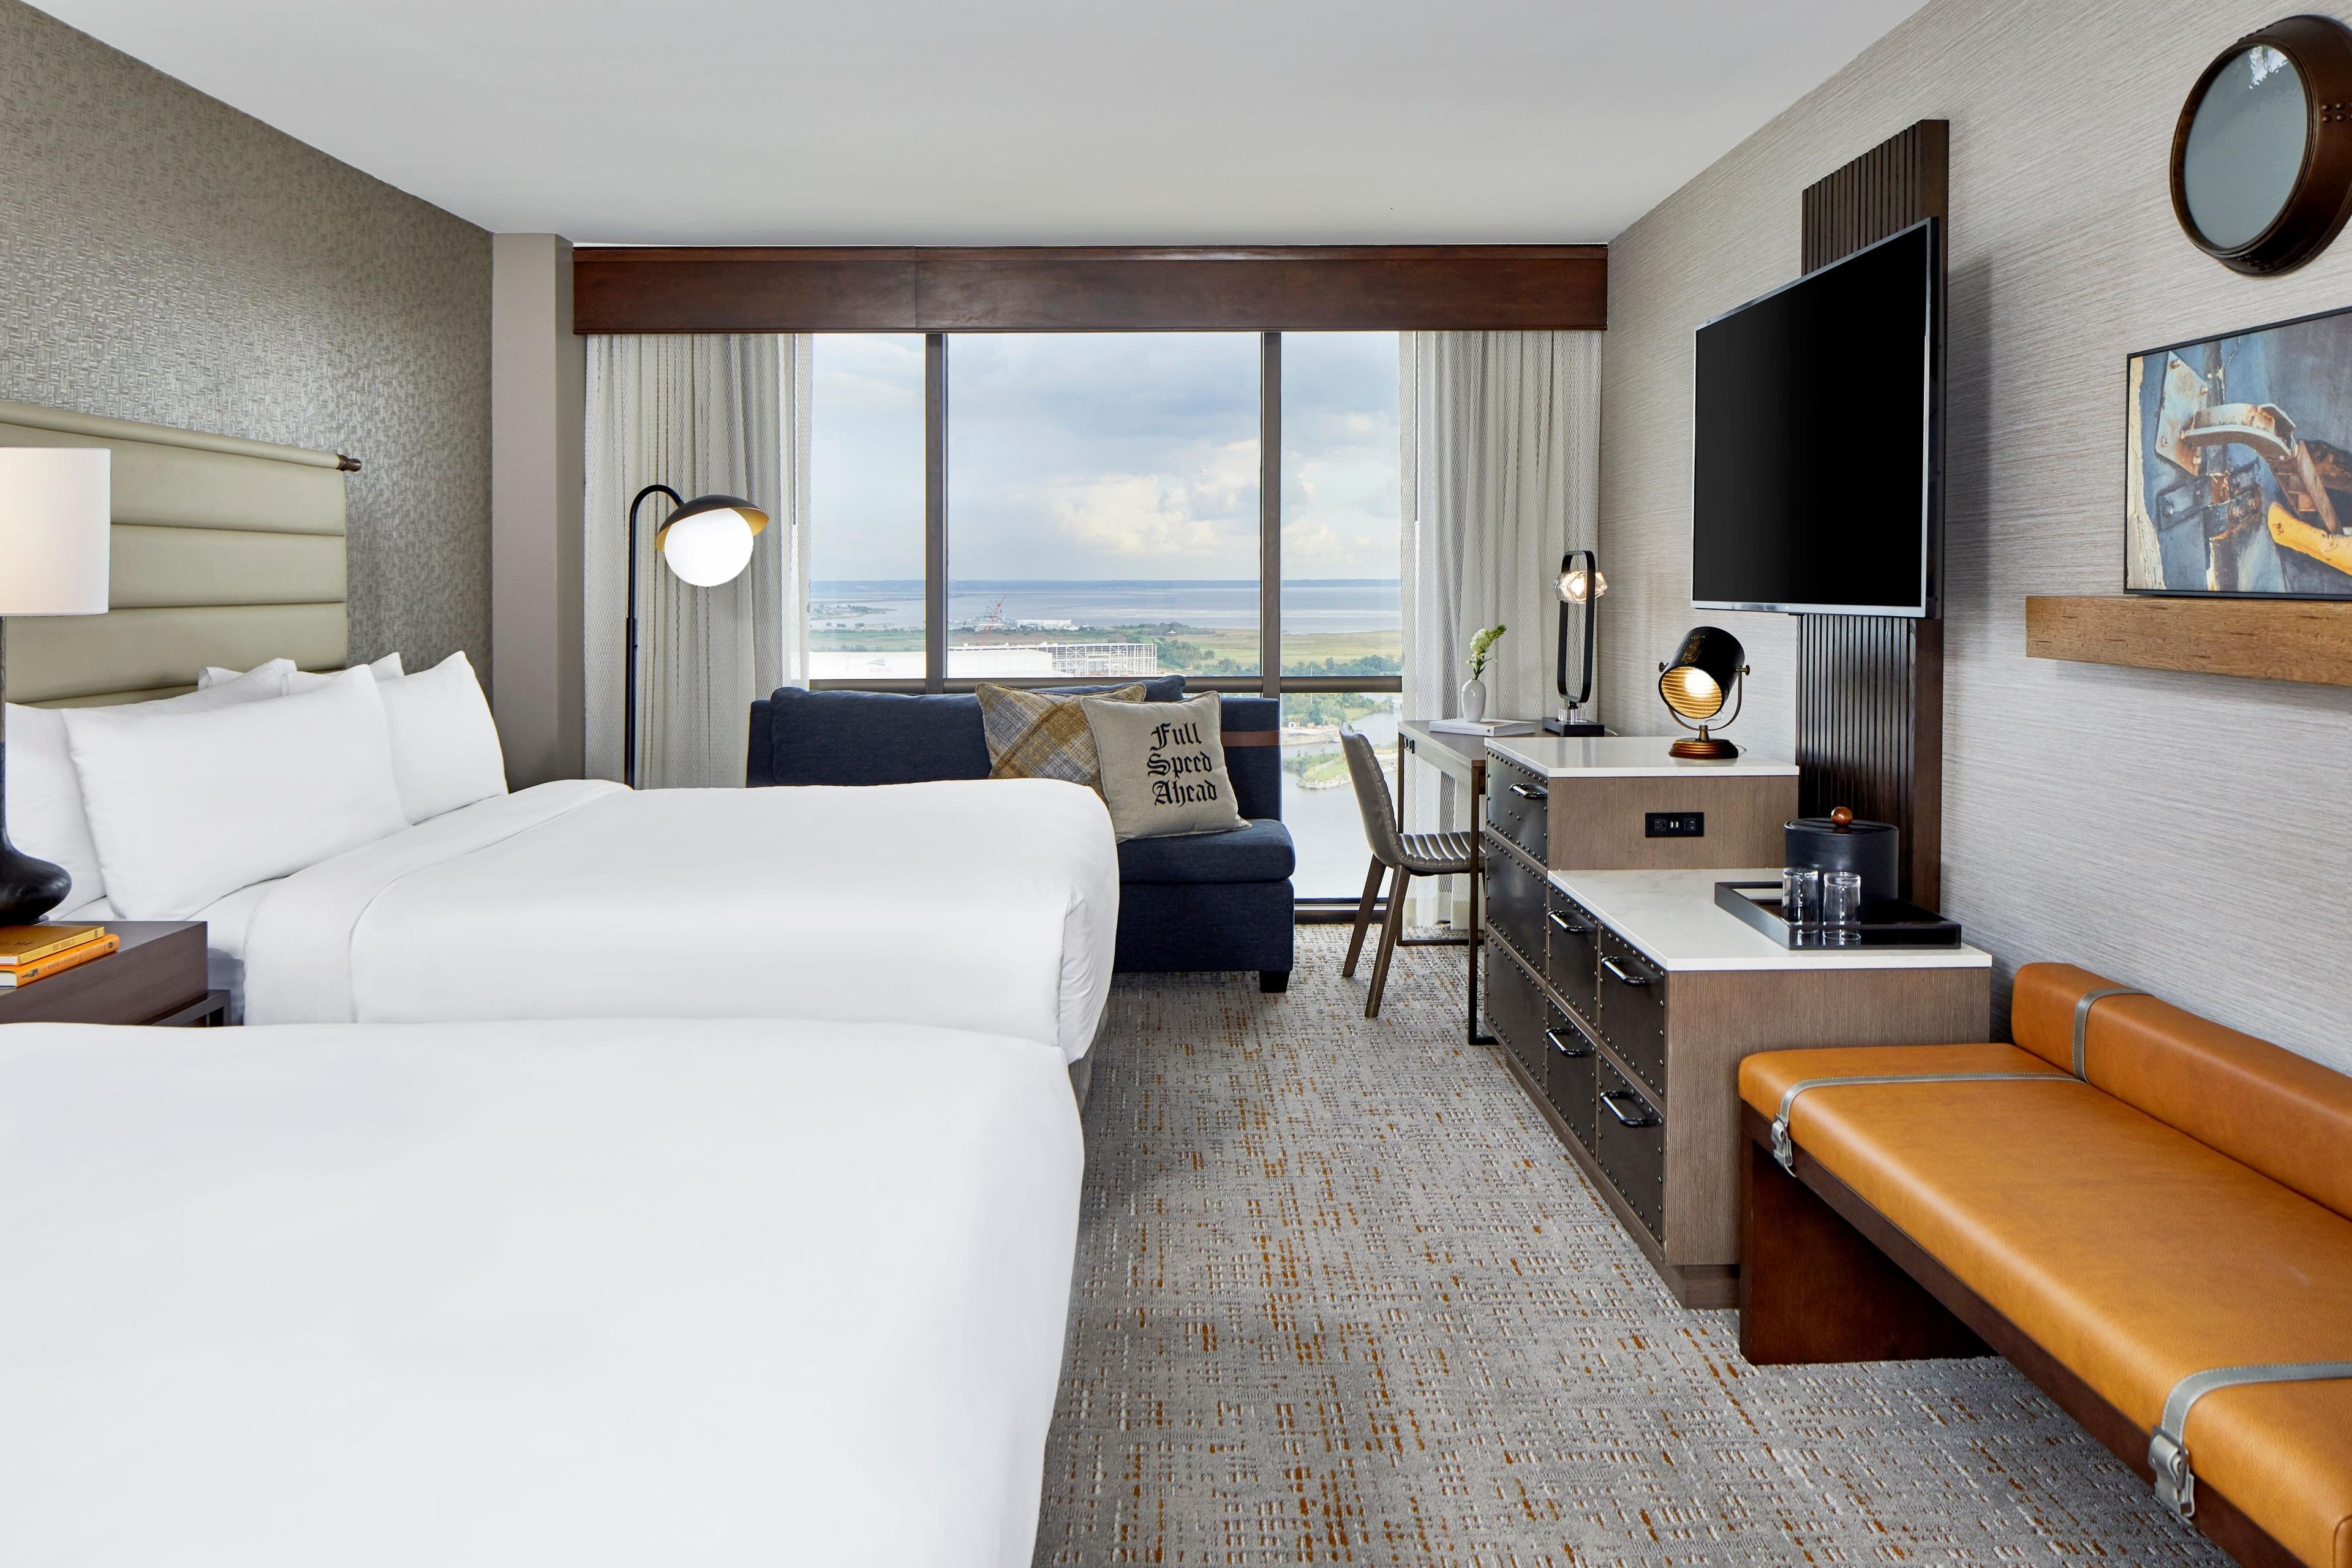 Some of our hotel rooms with two queen beds look out onto Mobile Bay and the Mobile River.